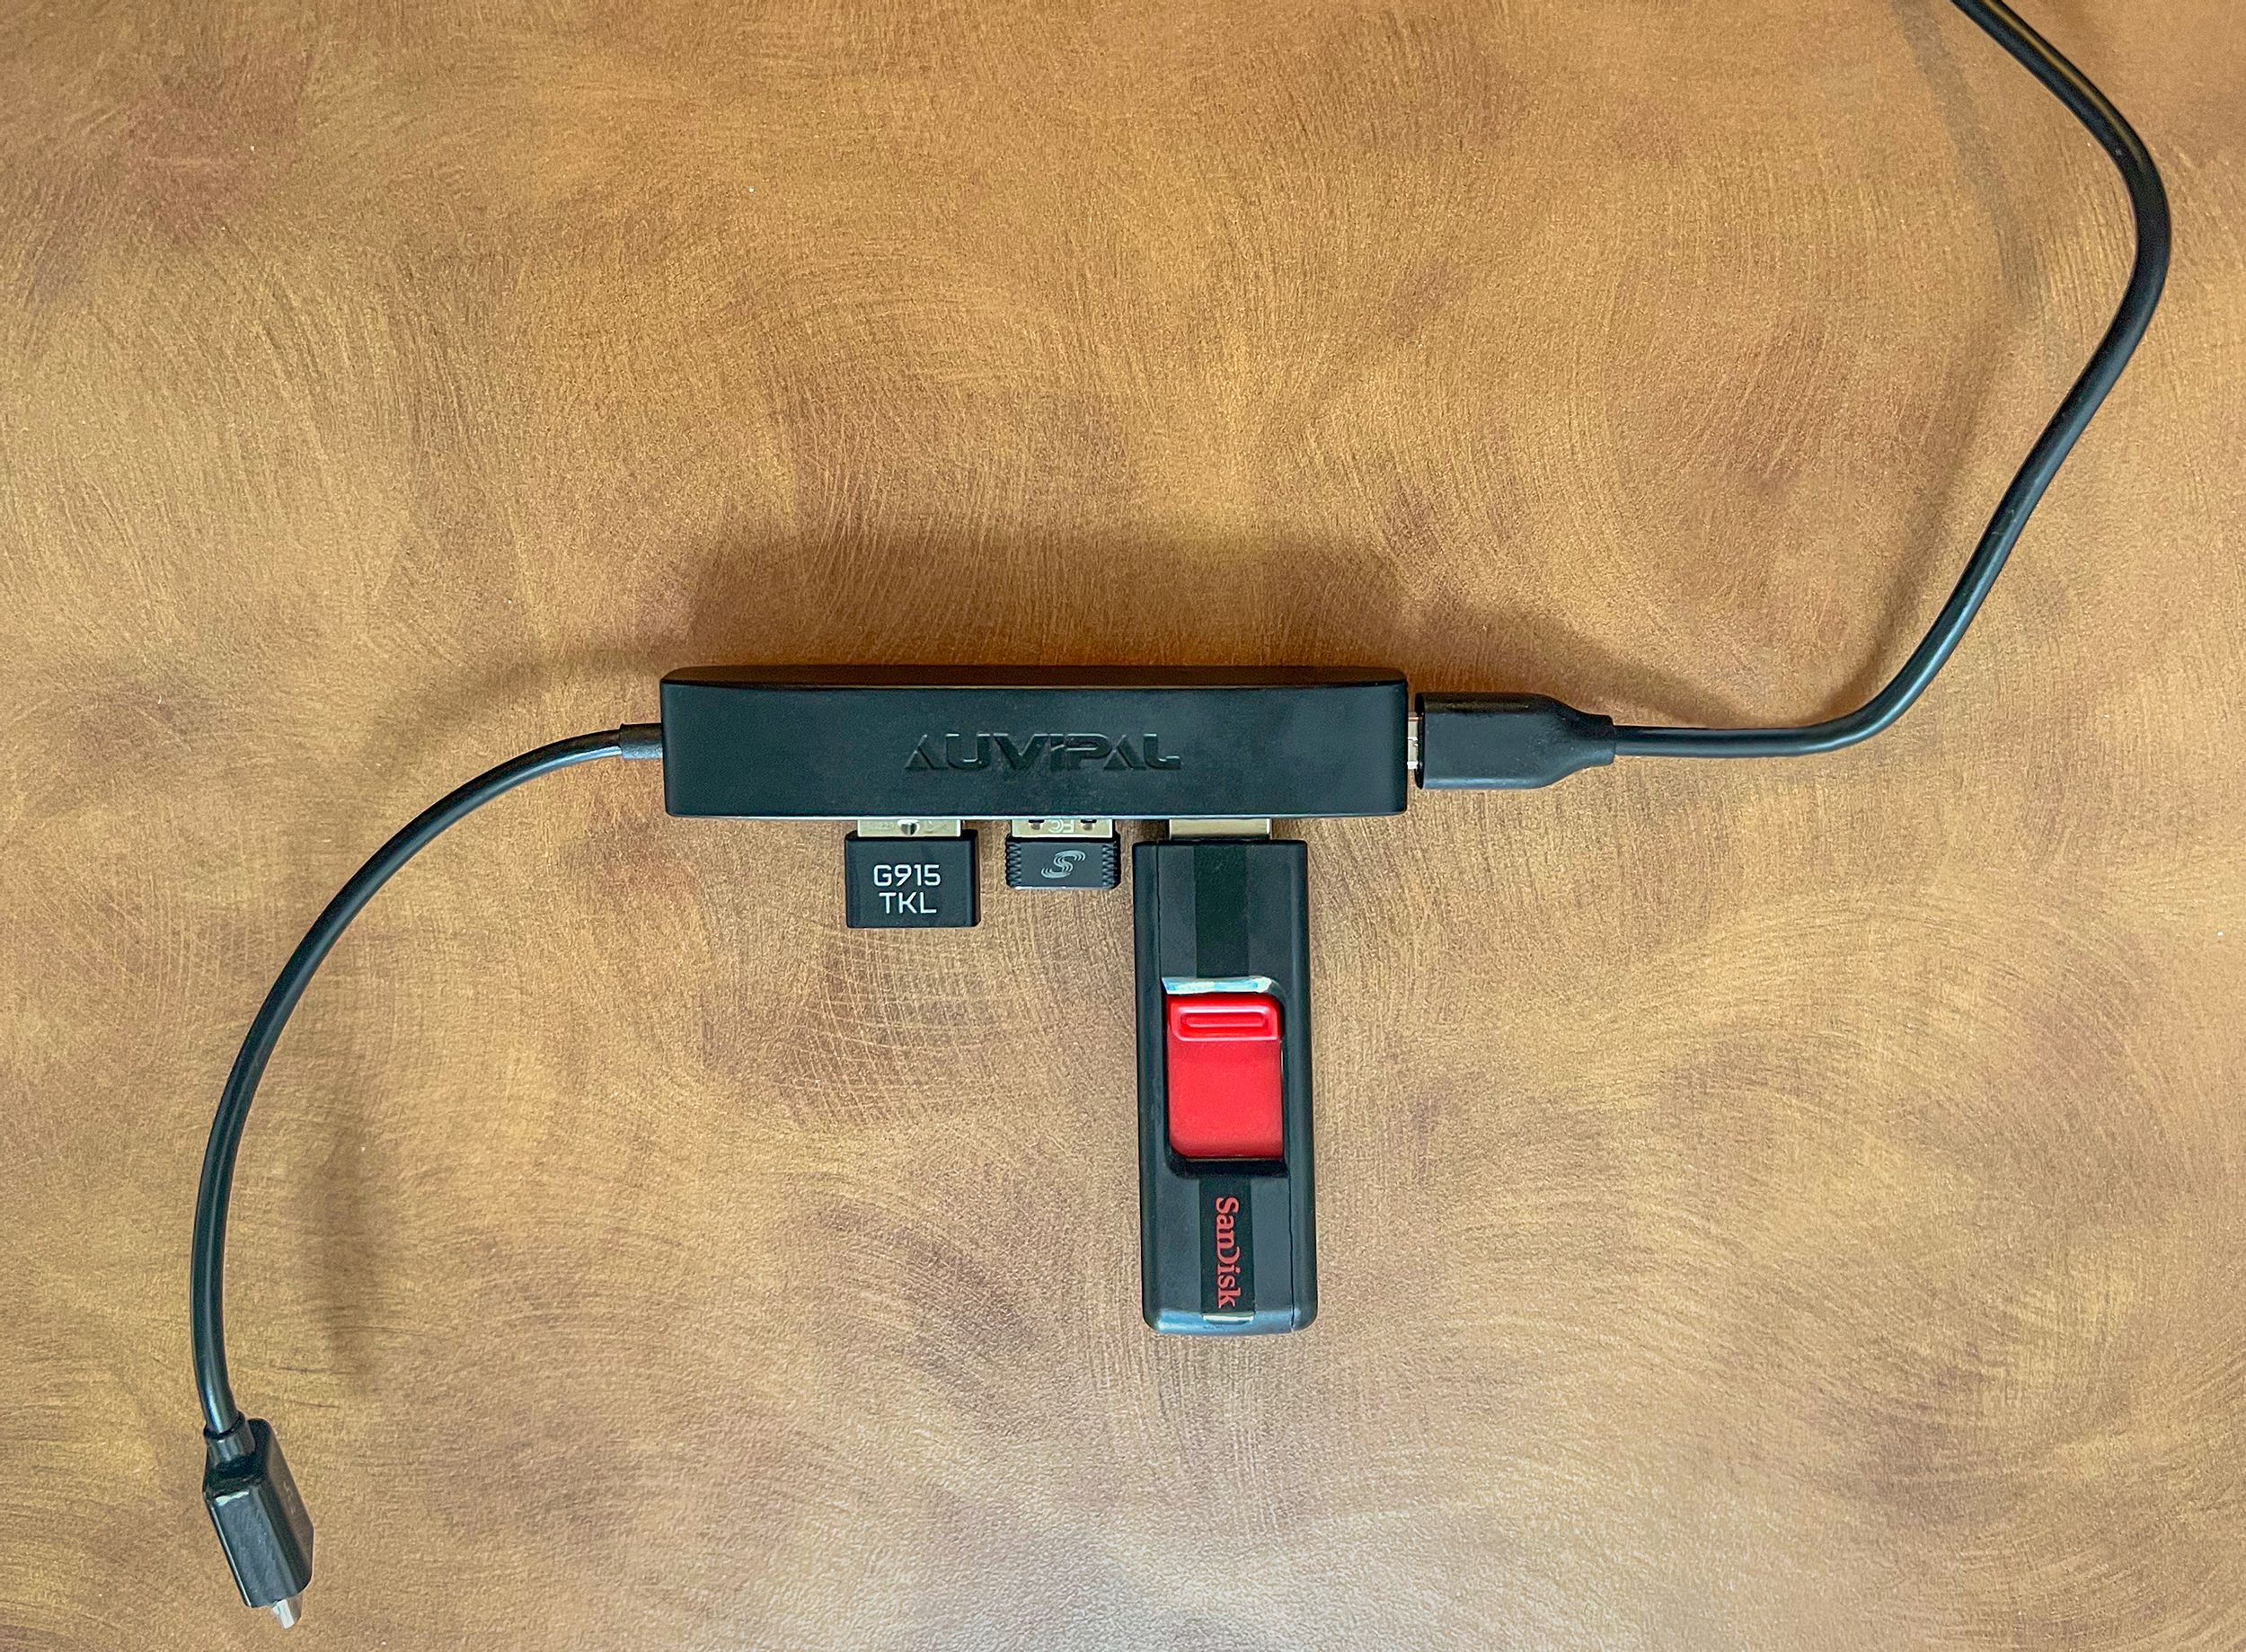 The different Micro USB OTG Adapters and Accessories that work well with  the  Fire TV Cube